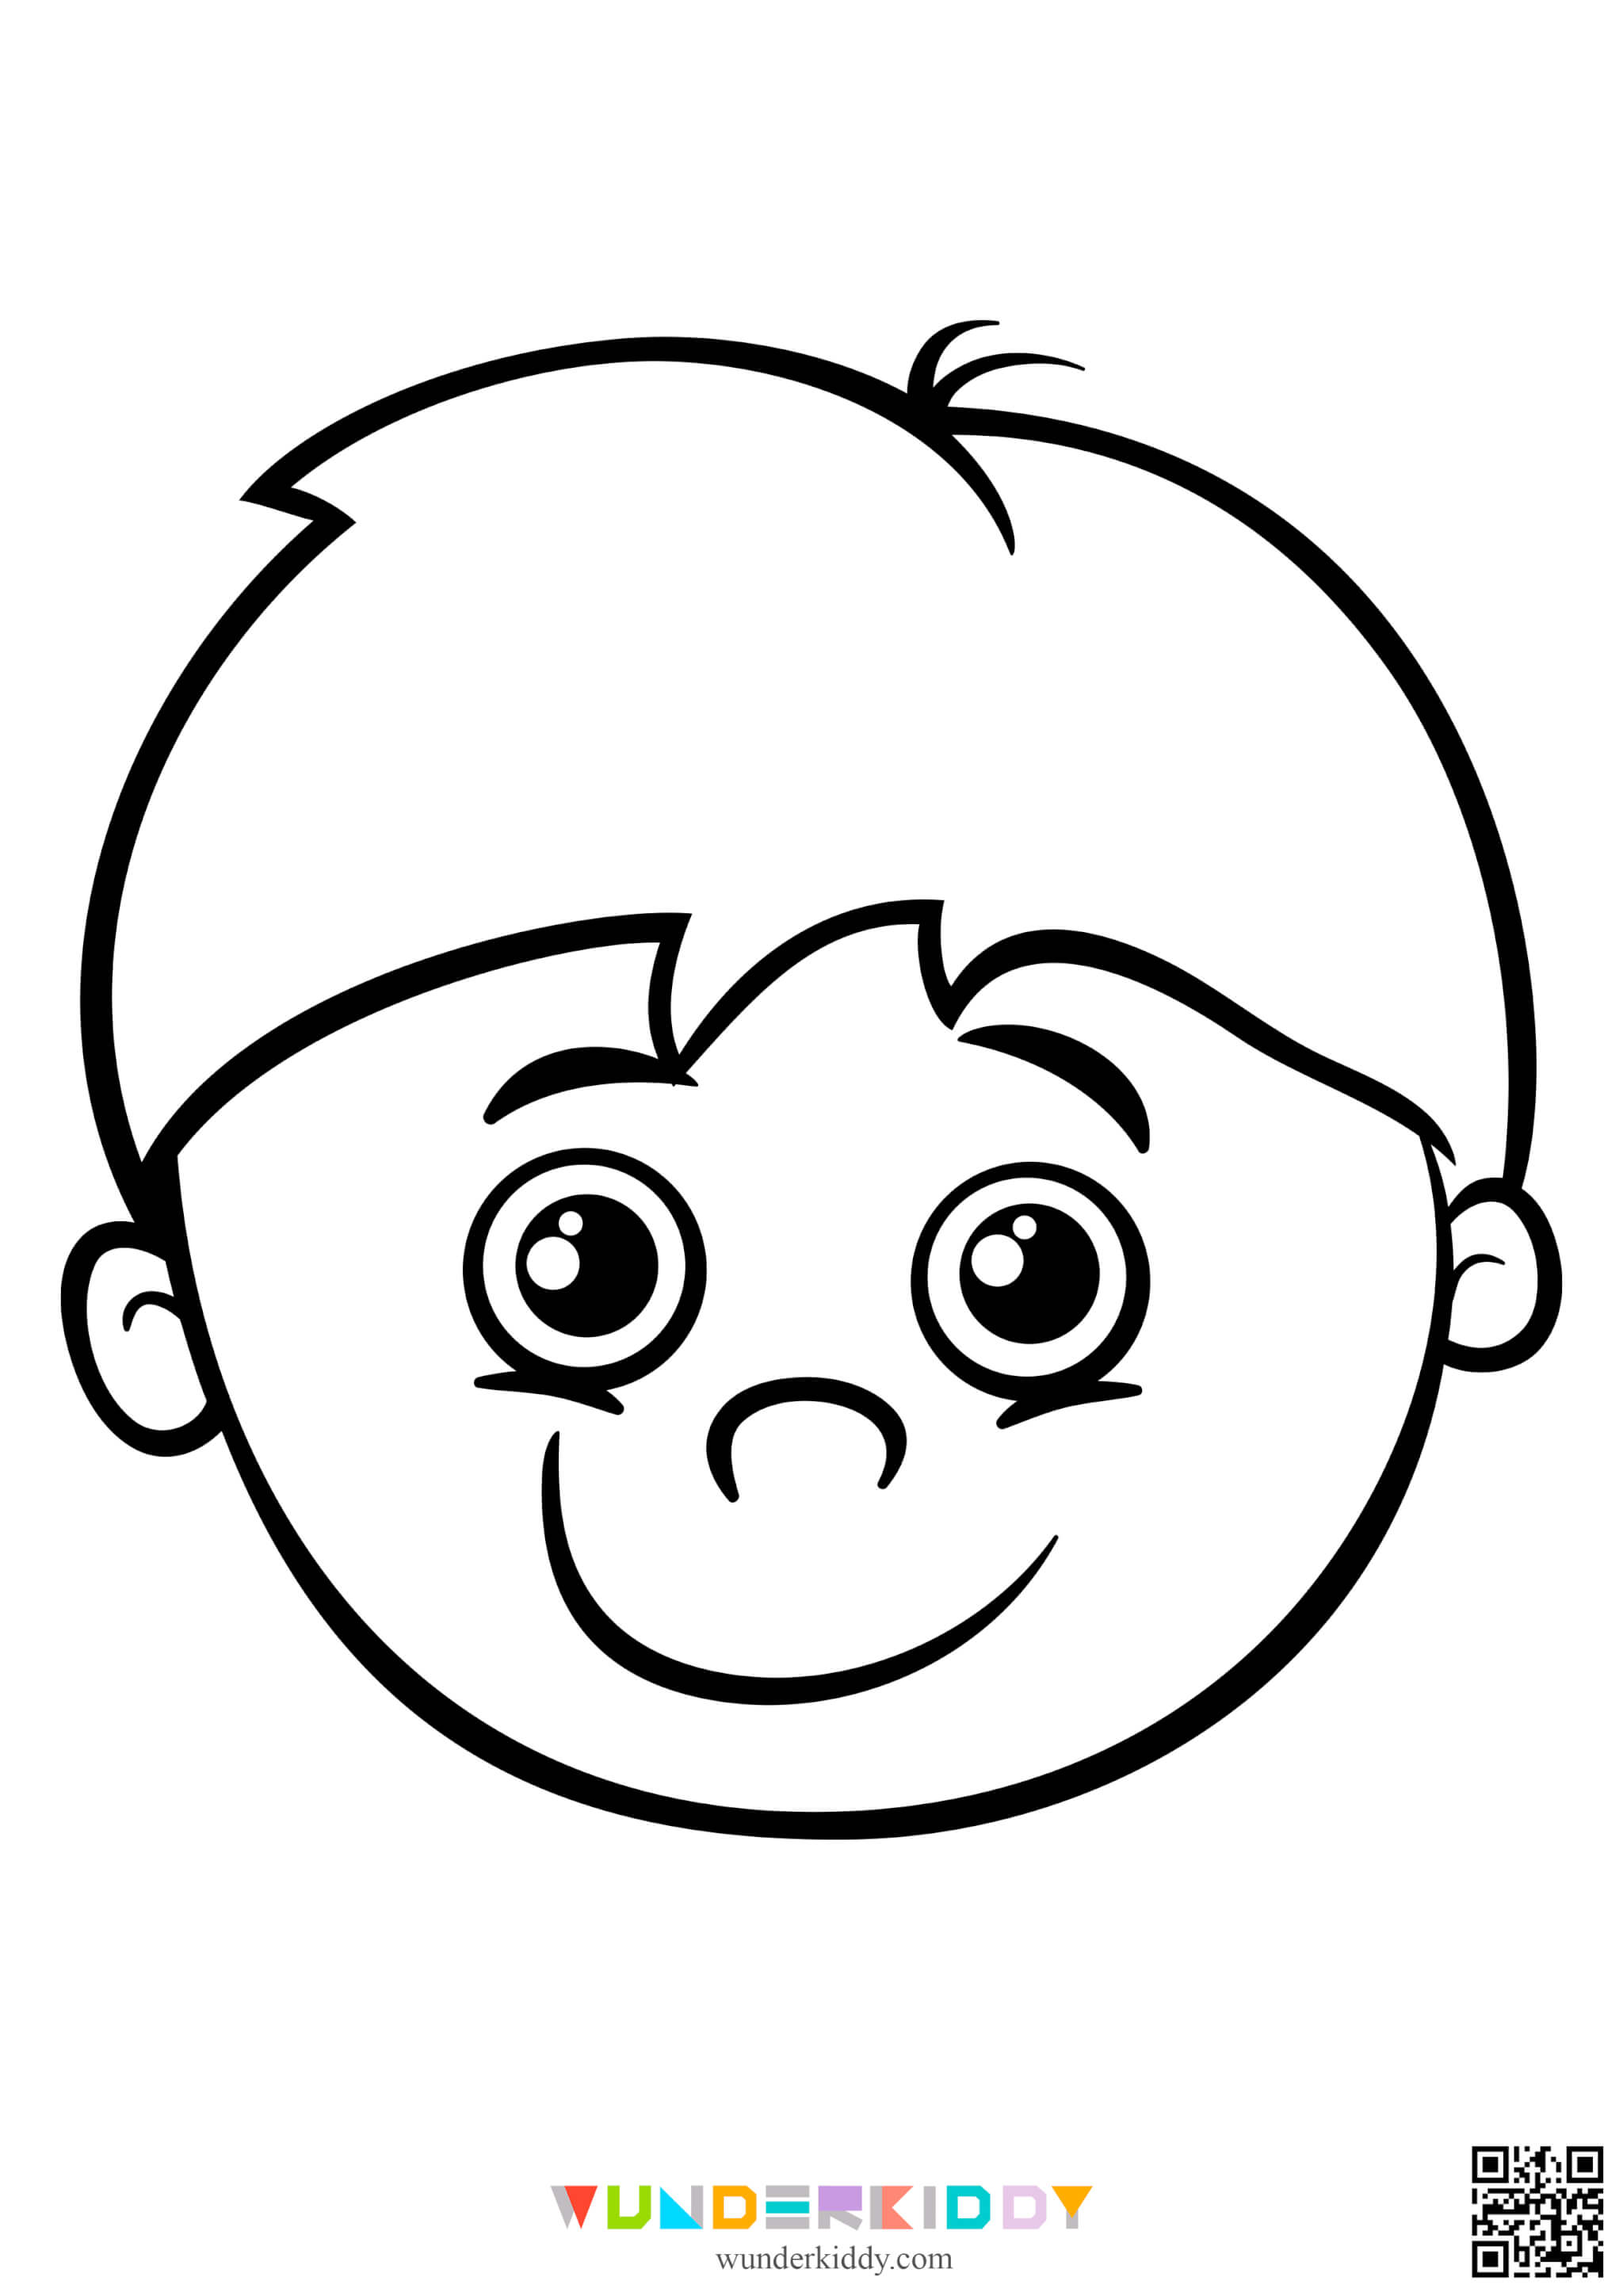 Face Coloring Page - Image 2